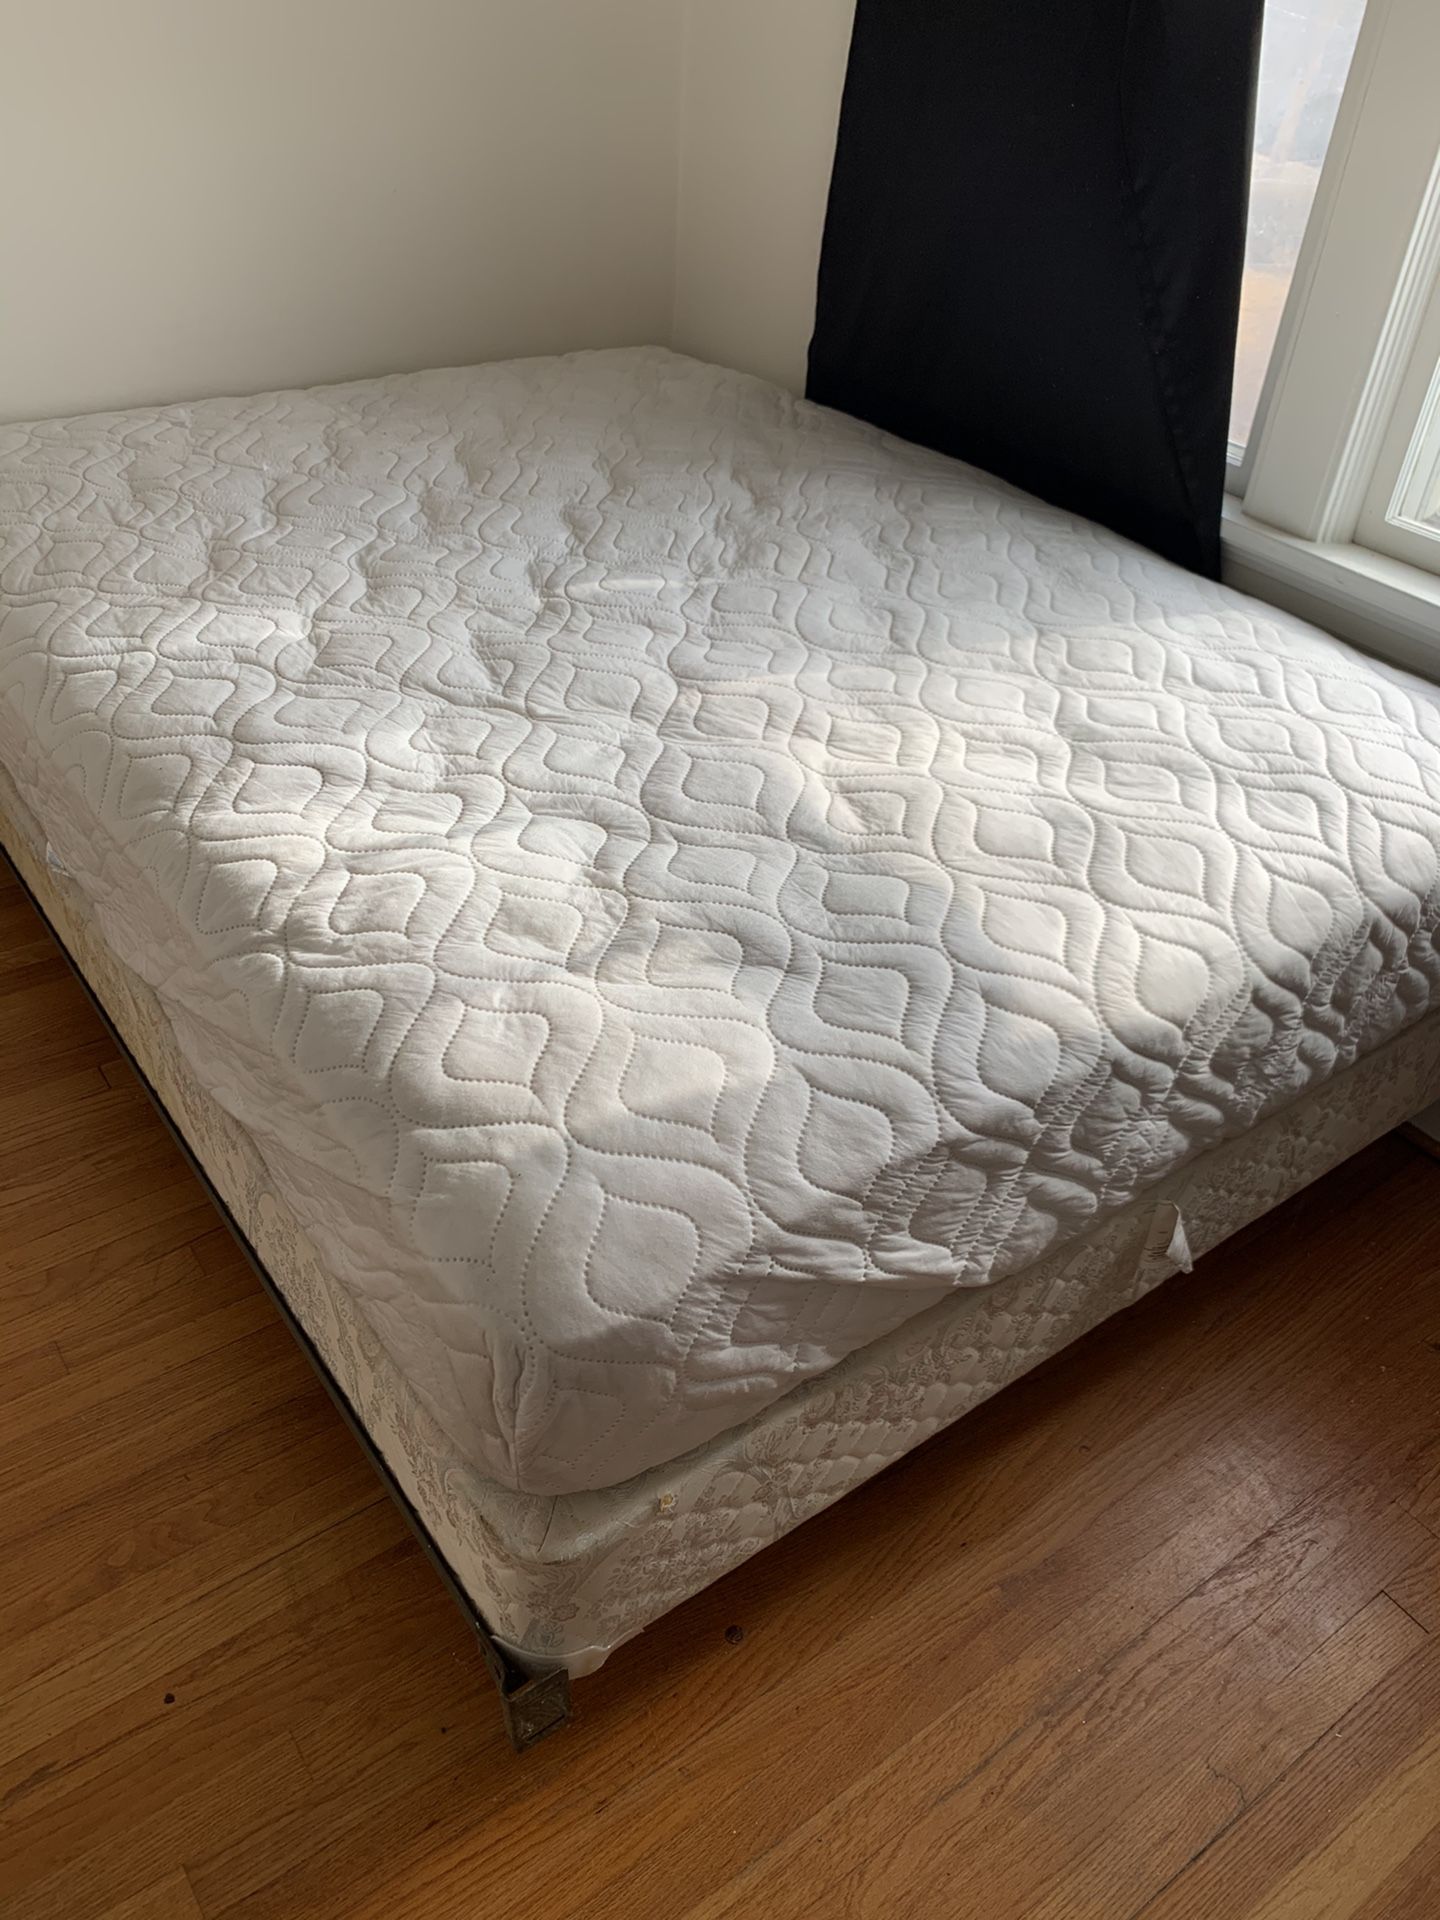 Serta Queen Mattress with Box Spring/Bed Frame